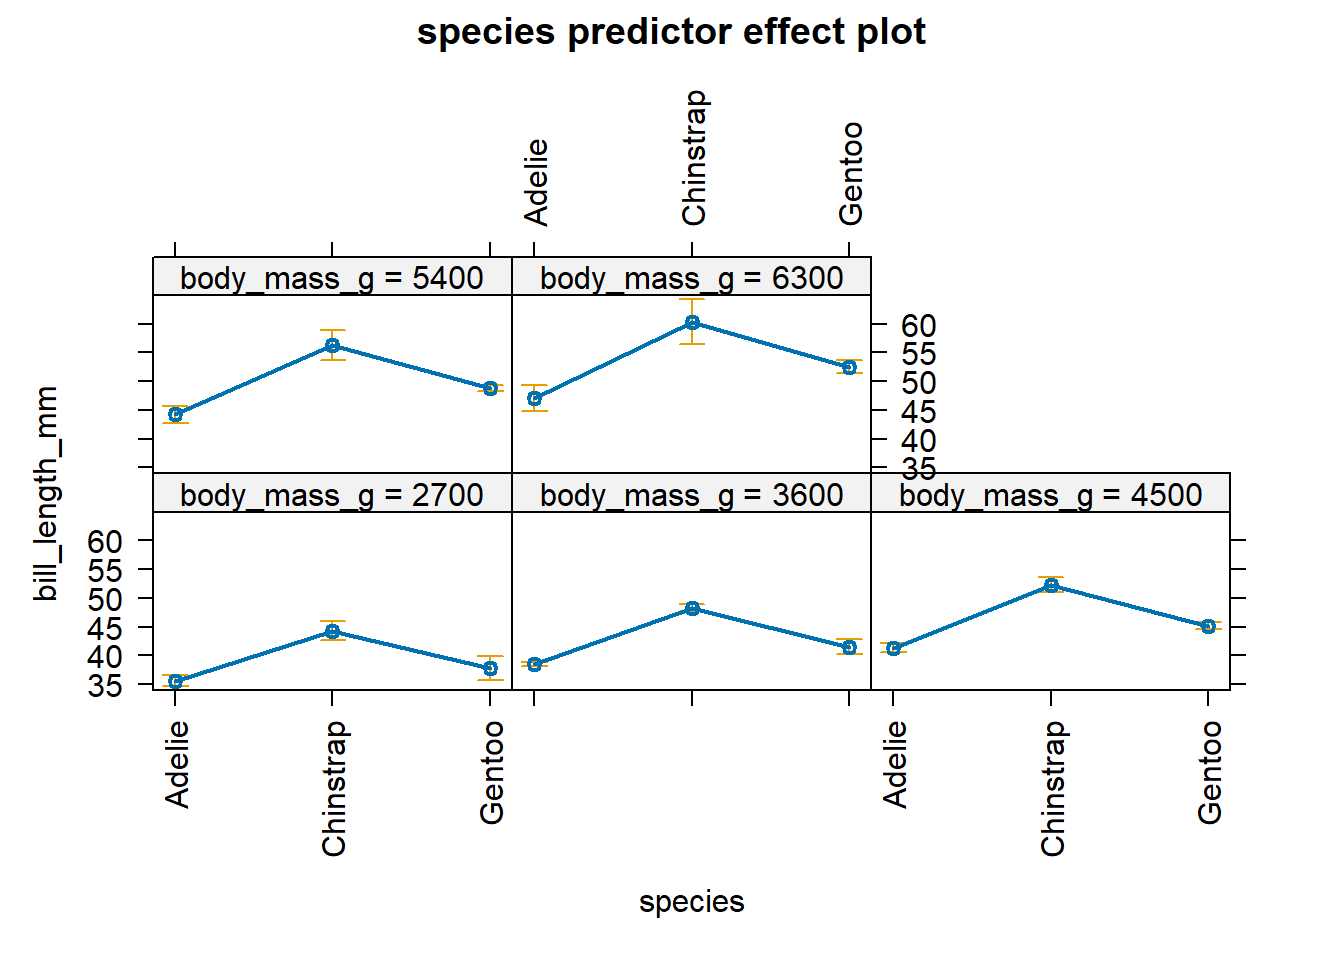 Effect plot for species based on the equations in Equation \@ref(eq:separate-lines-equations-effects-plot).